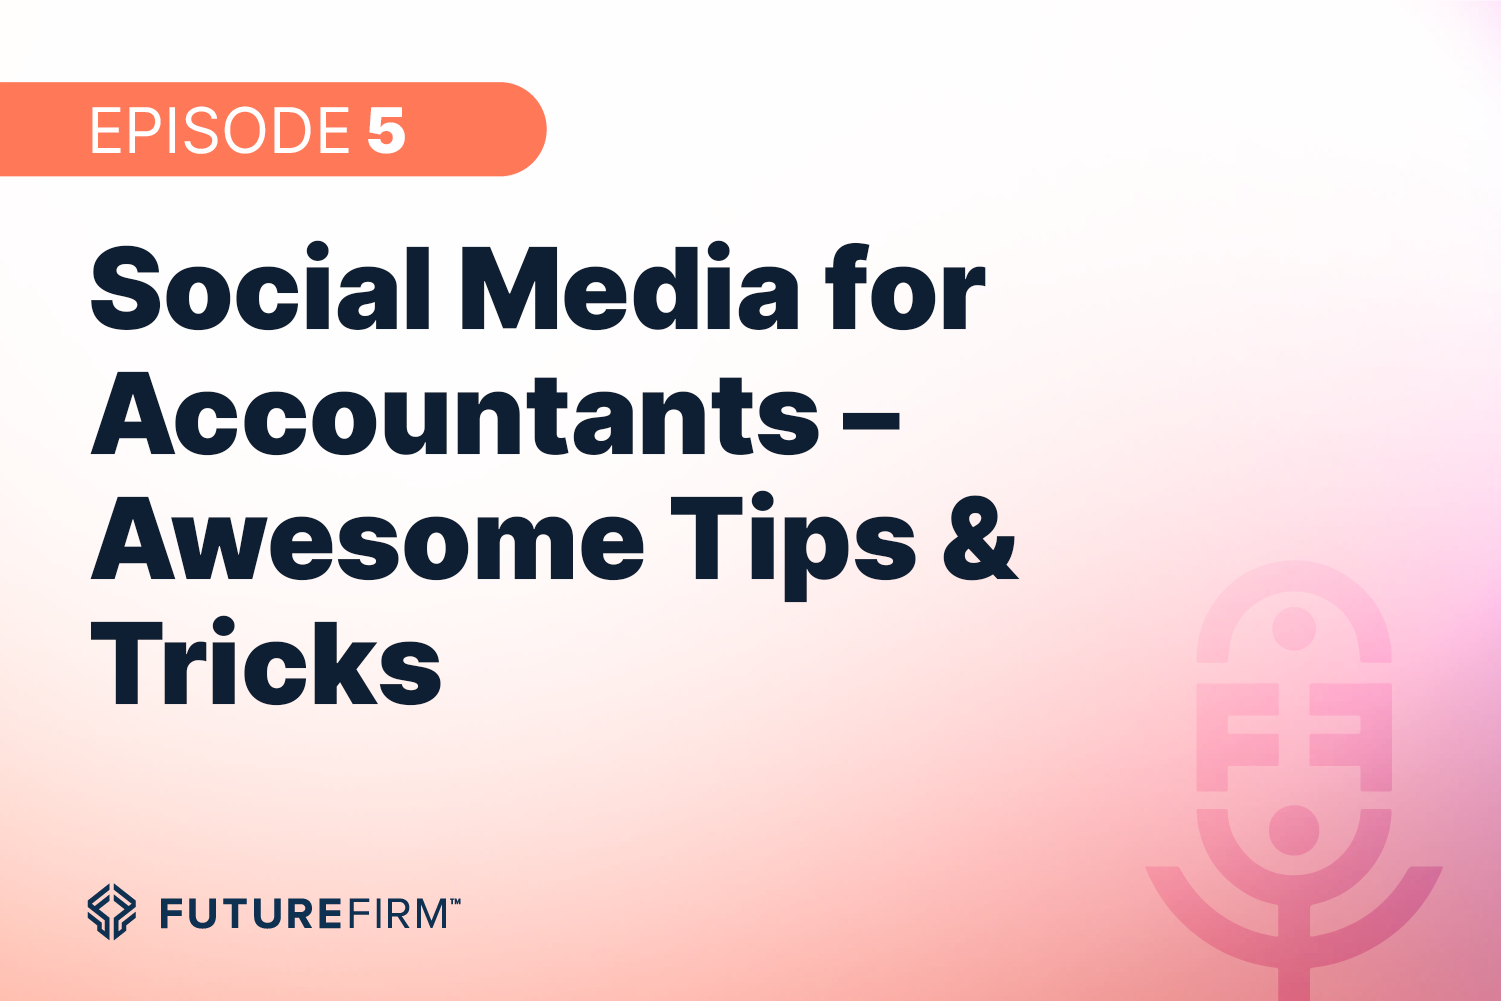 Social Media for Accountants – Awesome Tips & Tricks